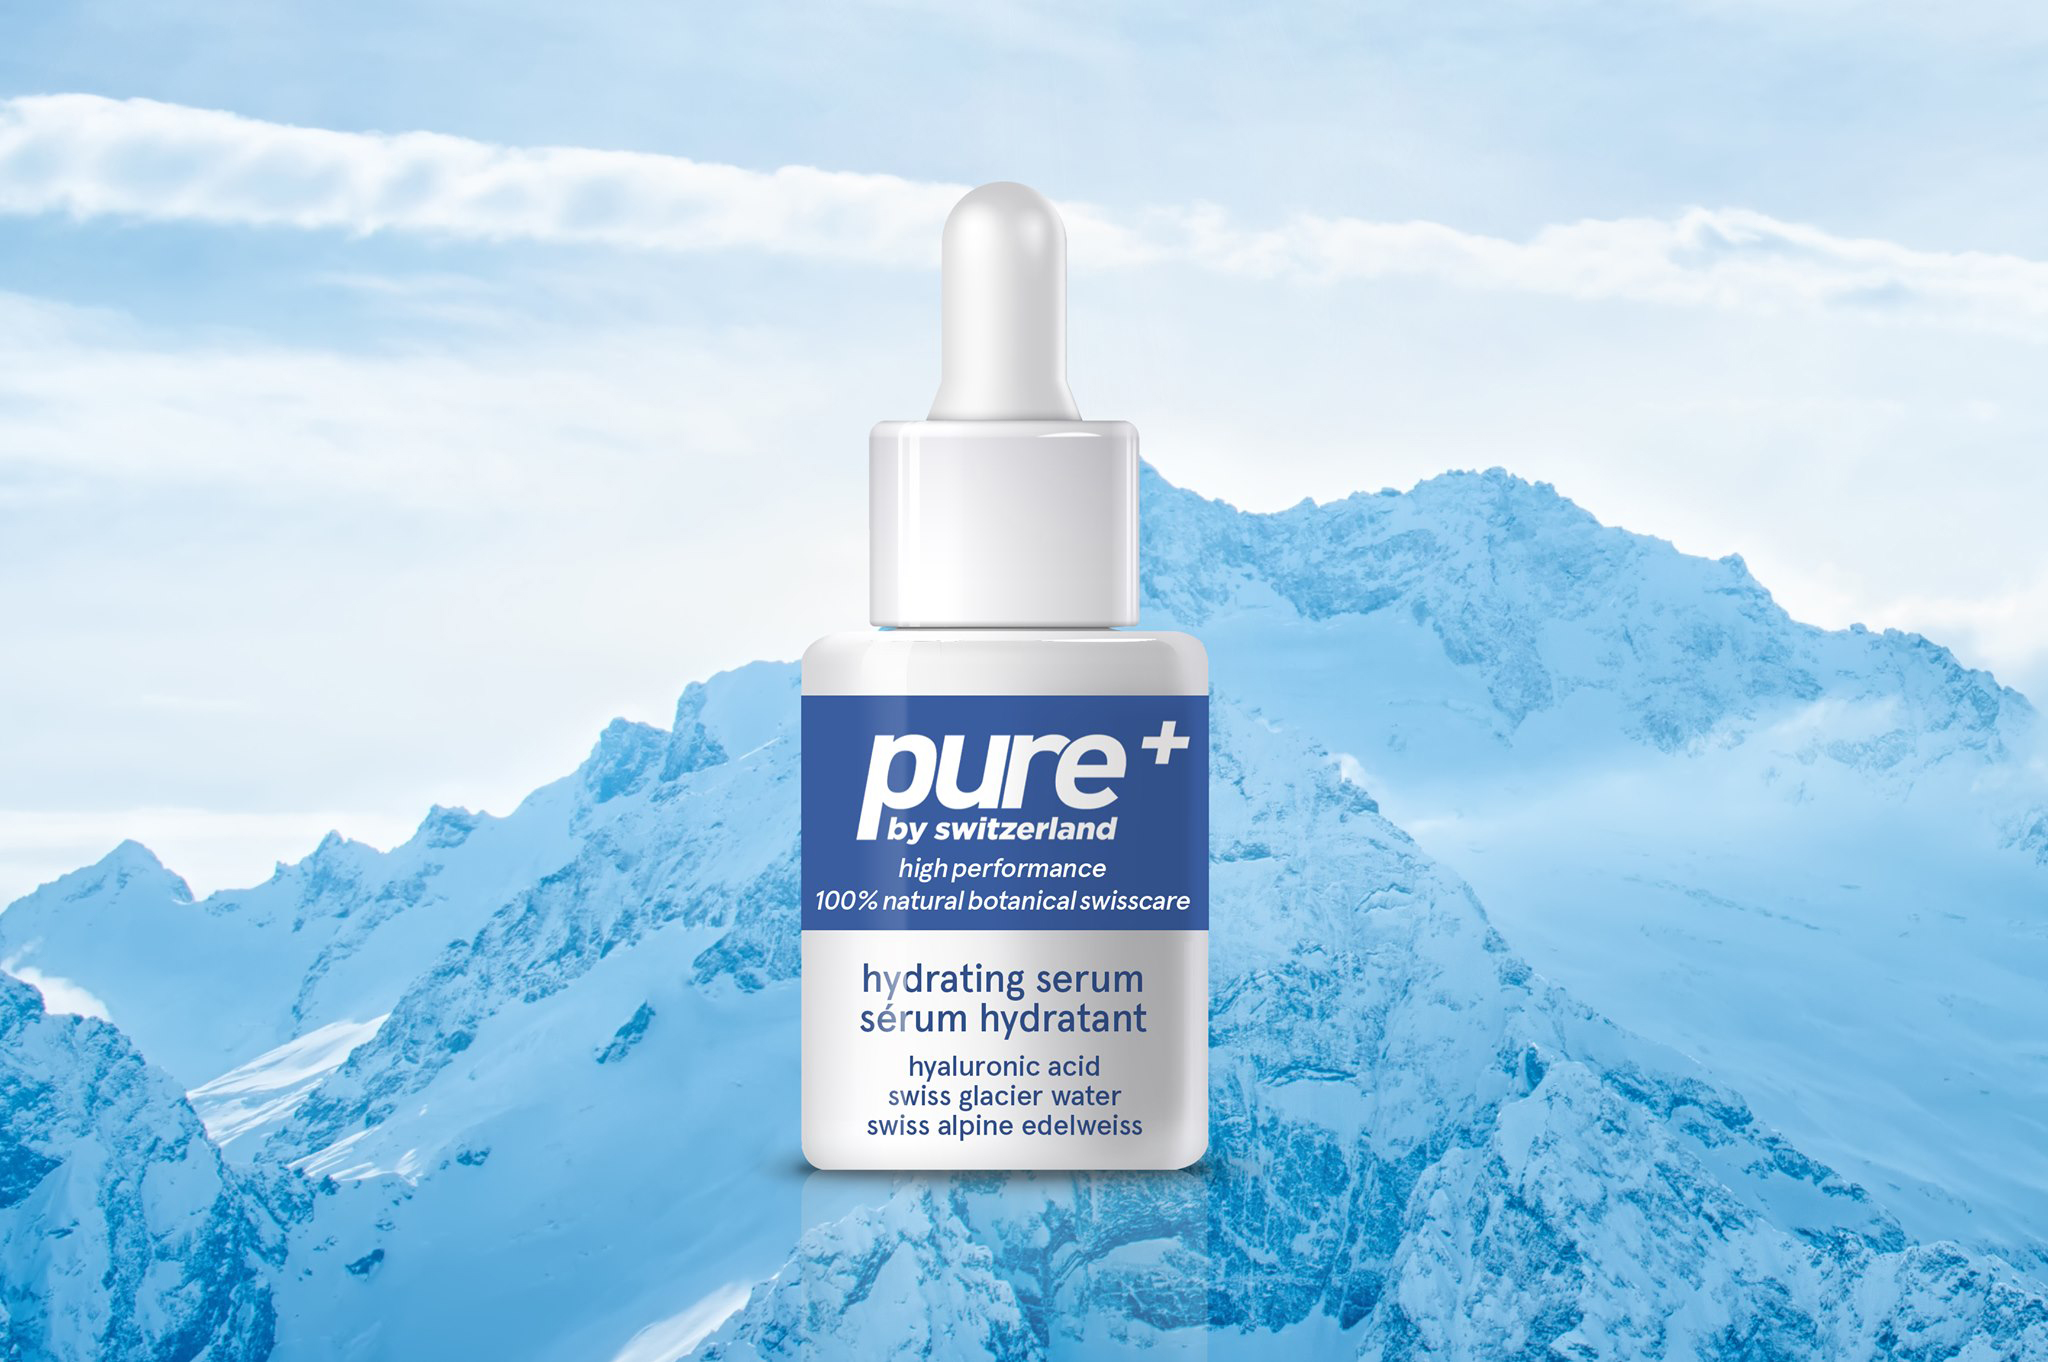 Pure+ serum displayed on backdrop of Swiss Alps